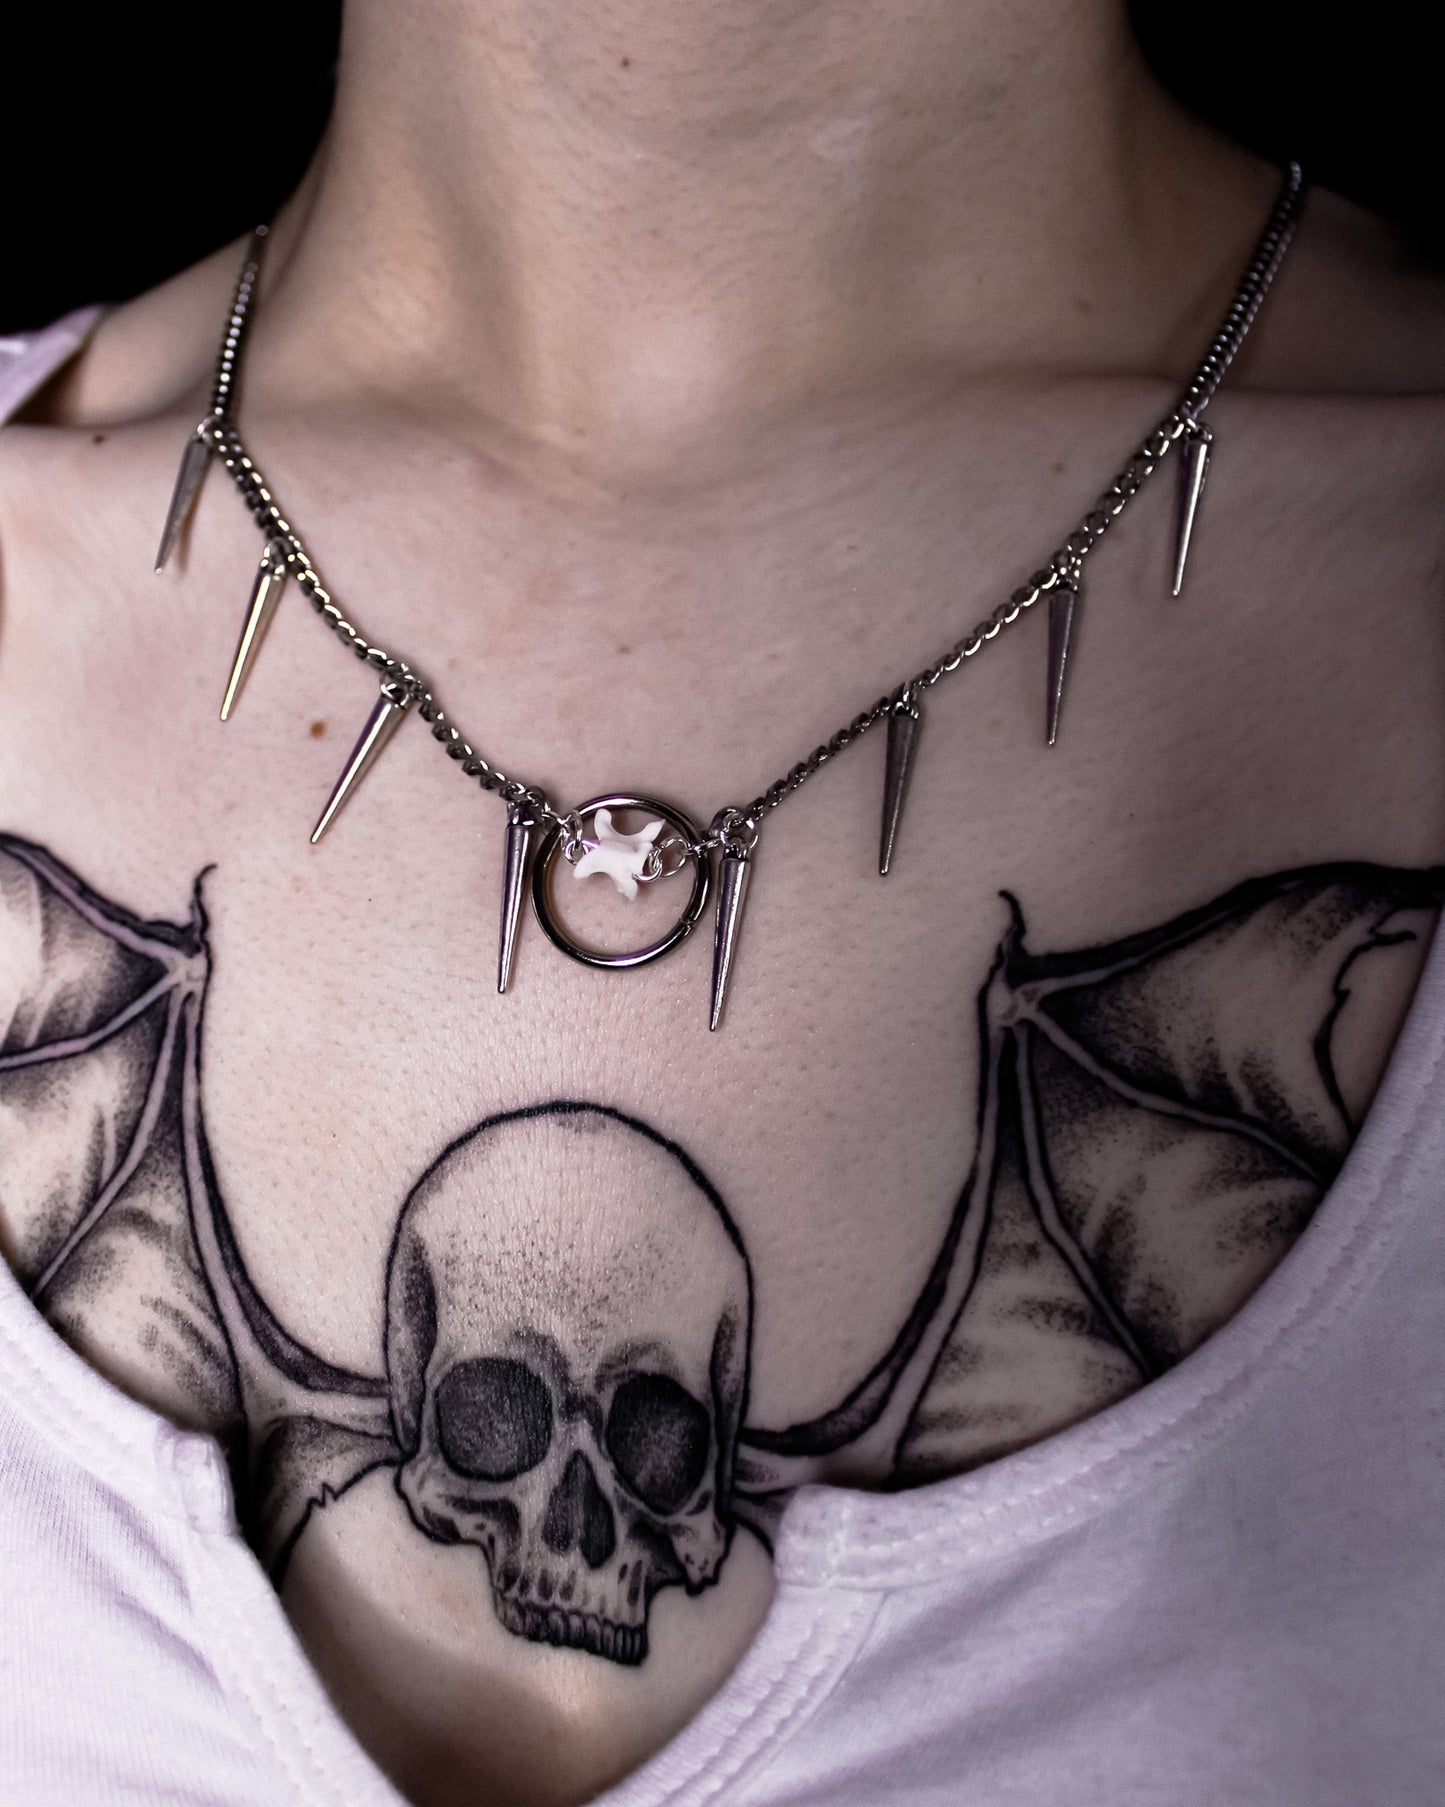 '𝕬𝖒𝖊𝖑𝖎𝖆" Necklace